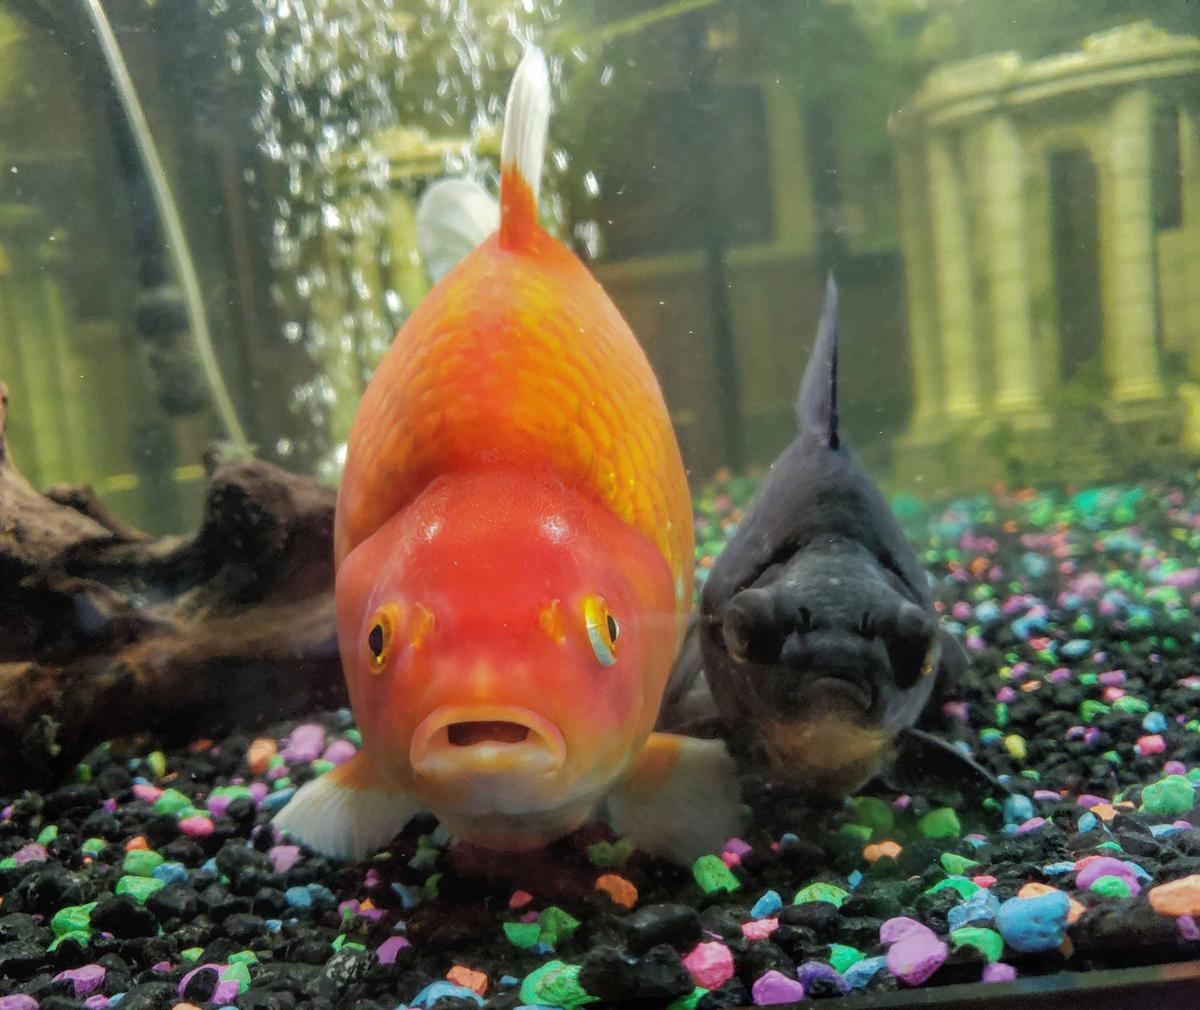 The monster guppy just kept growing—and now measures a whopping 12 inches long and has outgrown TWO fish tanks. (Caters News)